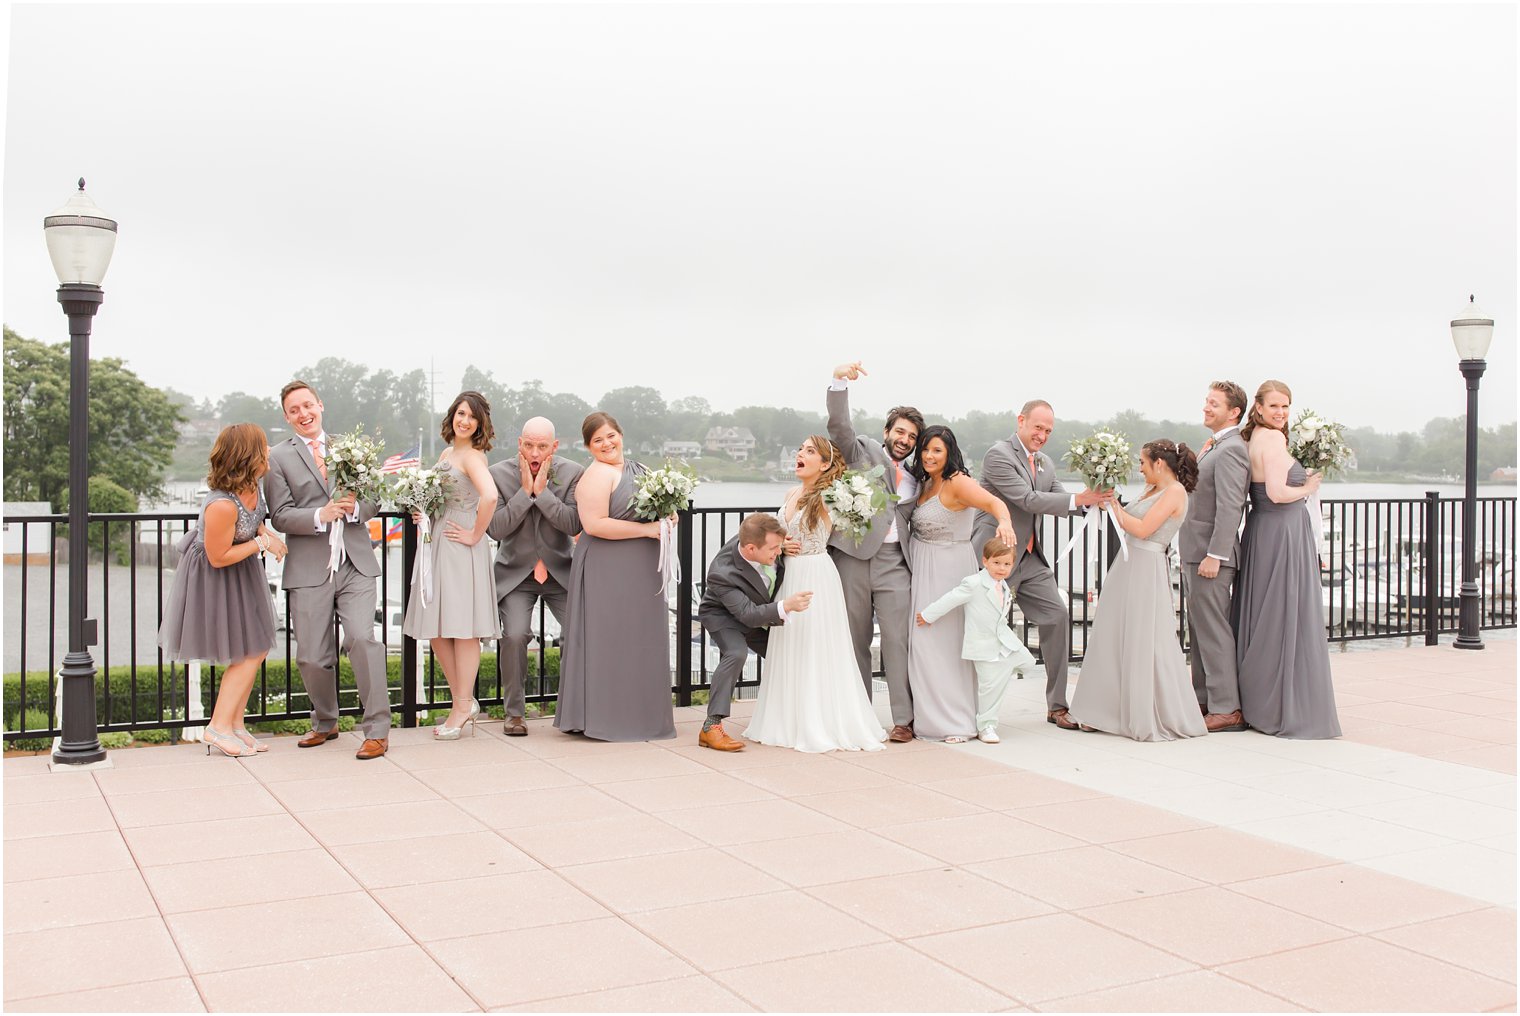 Wedding party in shades of gray